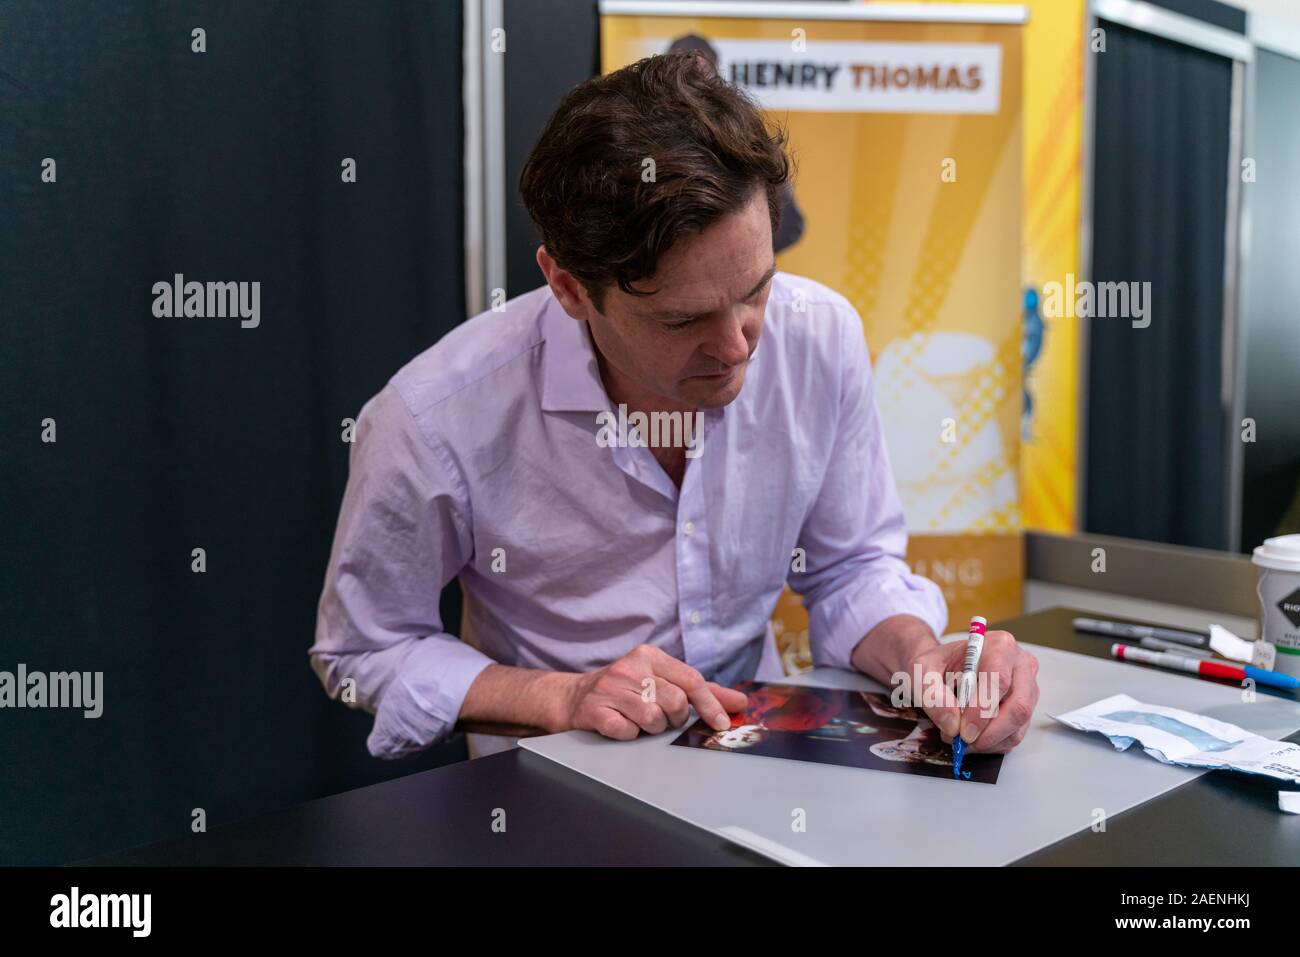 DORTMUND, GERMANY - December 8th 2019: Henry Thomas (*1971, American actor and musician - E.T., Haunting, Psycho IV) is happy to meet fans at German Comic Con Dortmund, a two day fan convention Stock Photo